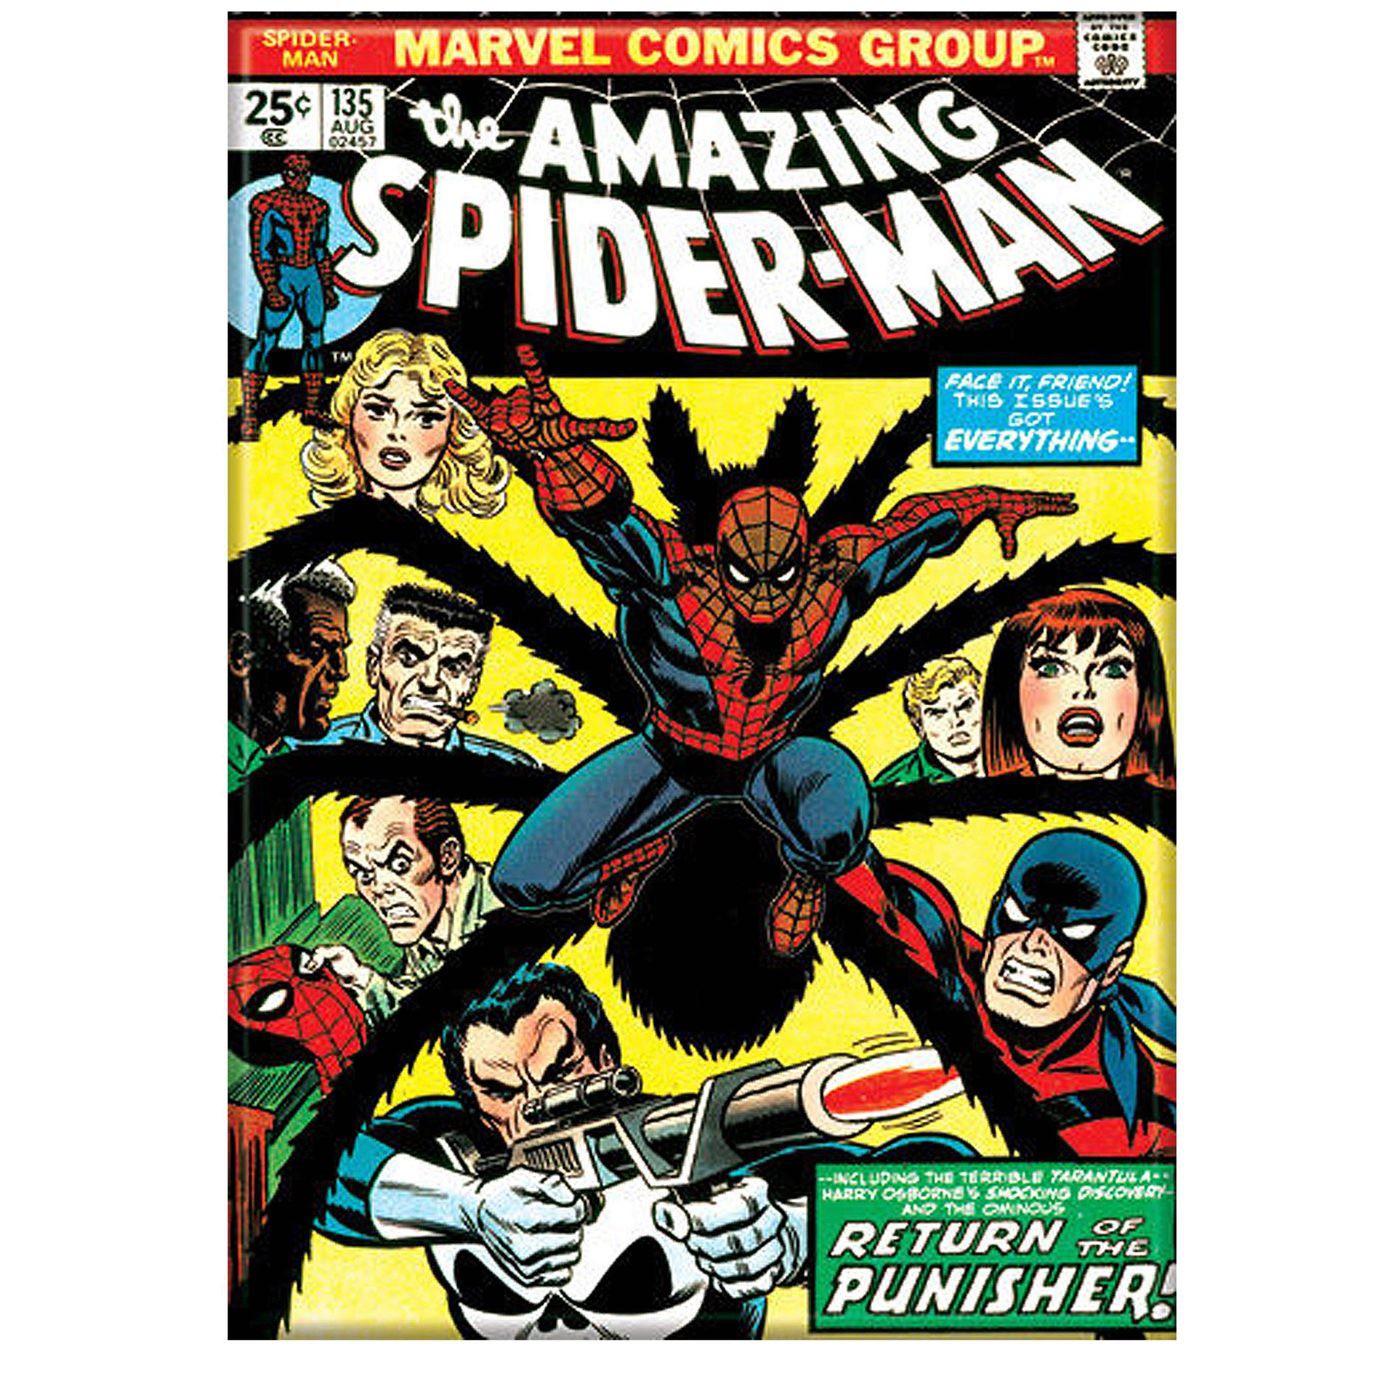 Spiderman #135 Group Comic Cover Magnet